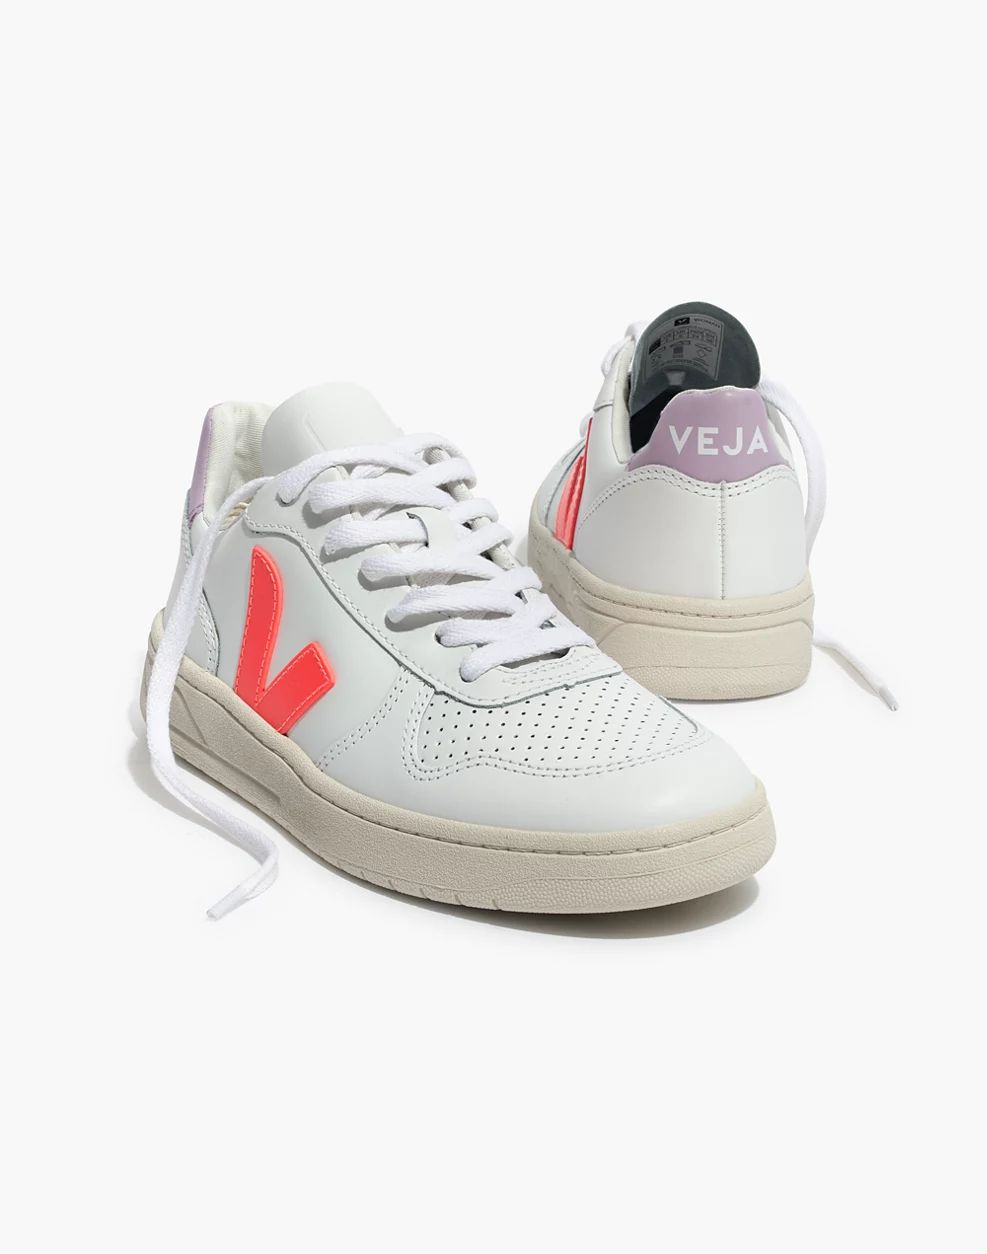 Madewell x Veja&trade; V-10 Leather Sneakers in Lilac and Neon Orange | Madewell